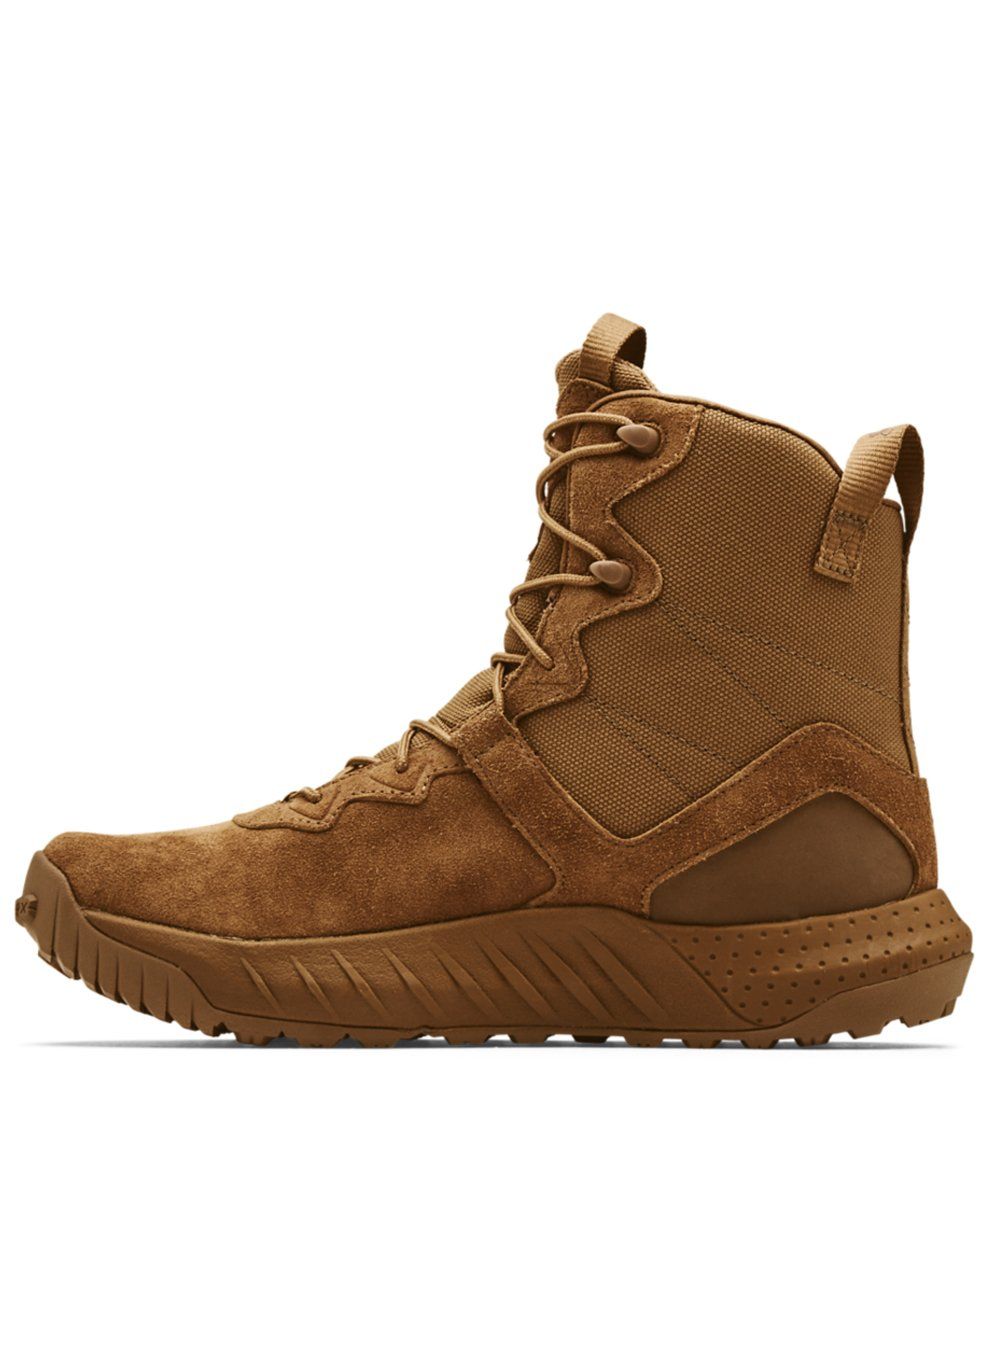 SALE - Under Armour Micro G Valsetz - Coyote - TacSource Tactical Gear